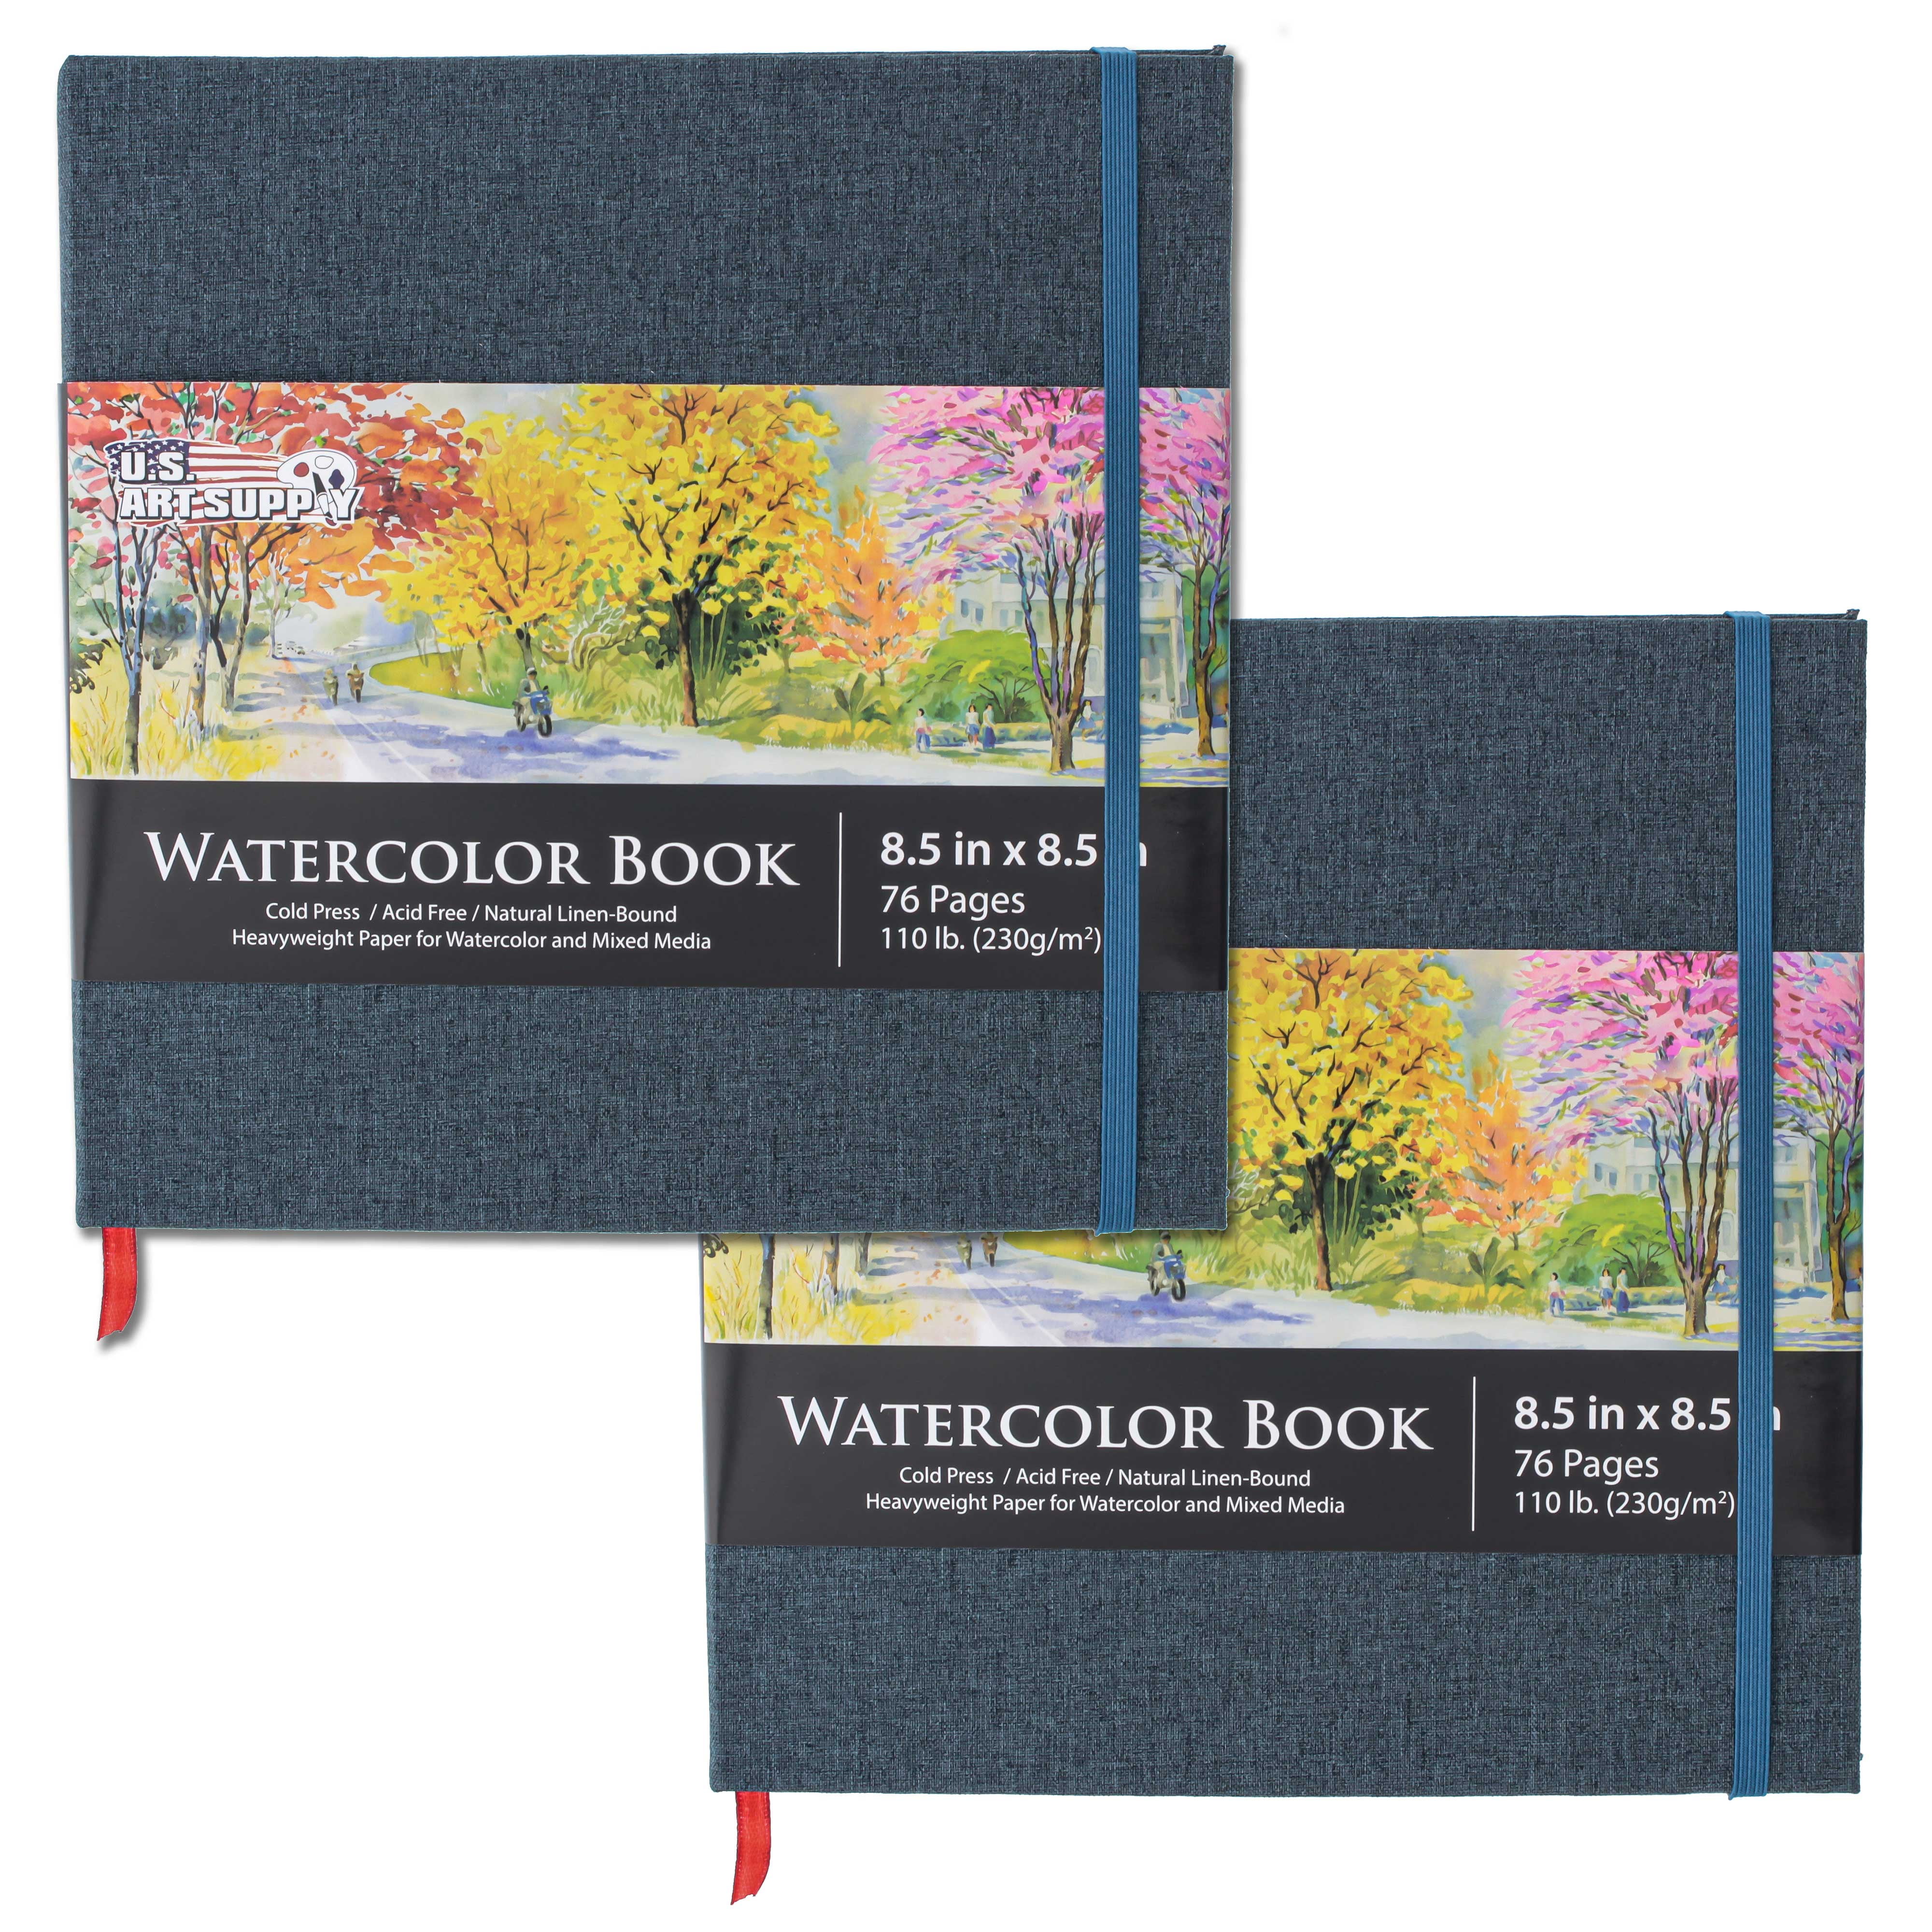 U.S. Art Supply 8.5 x 8.5 Watercolor Book, 2 Pack, 76 Sheets, 110 lb (230 Gsm) - Linen-Bound Hardcover Artists Paper Pads - Acid-free, Cold-Pressed